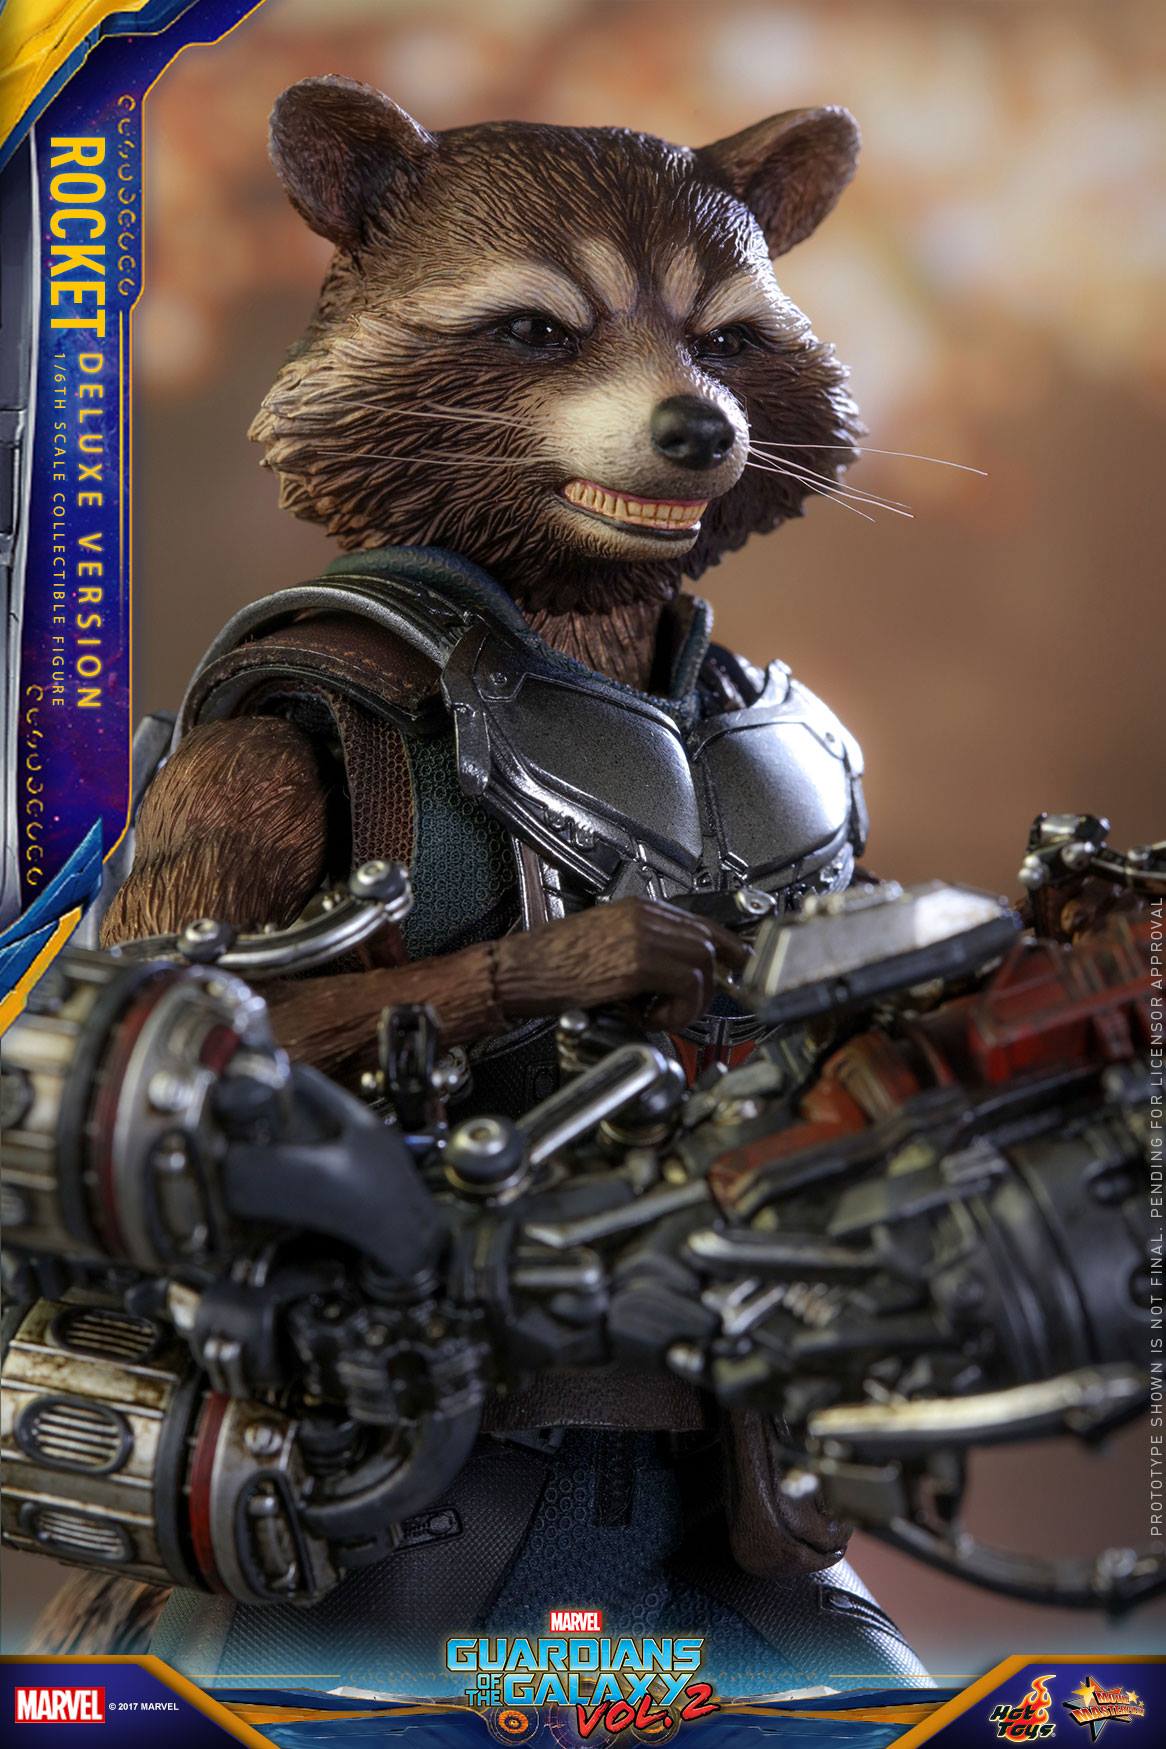 GOTG Vol. 2 - 1/6th scale Rocket Collectible Figure (Deluxe Ver.).